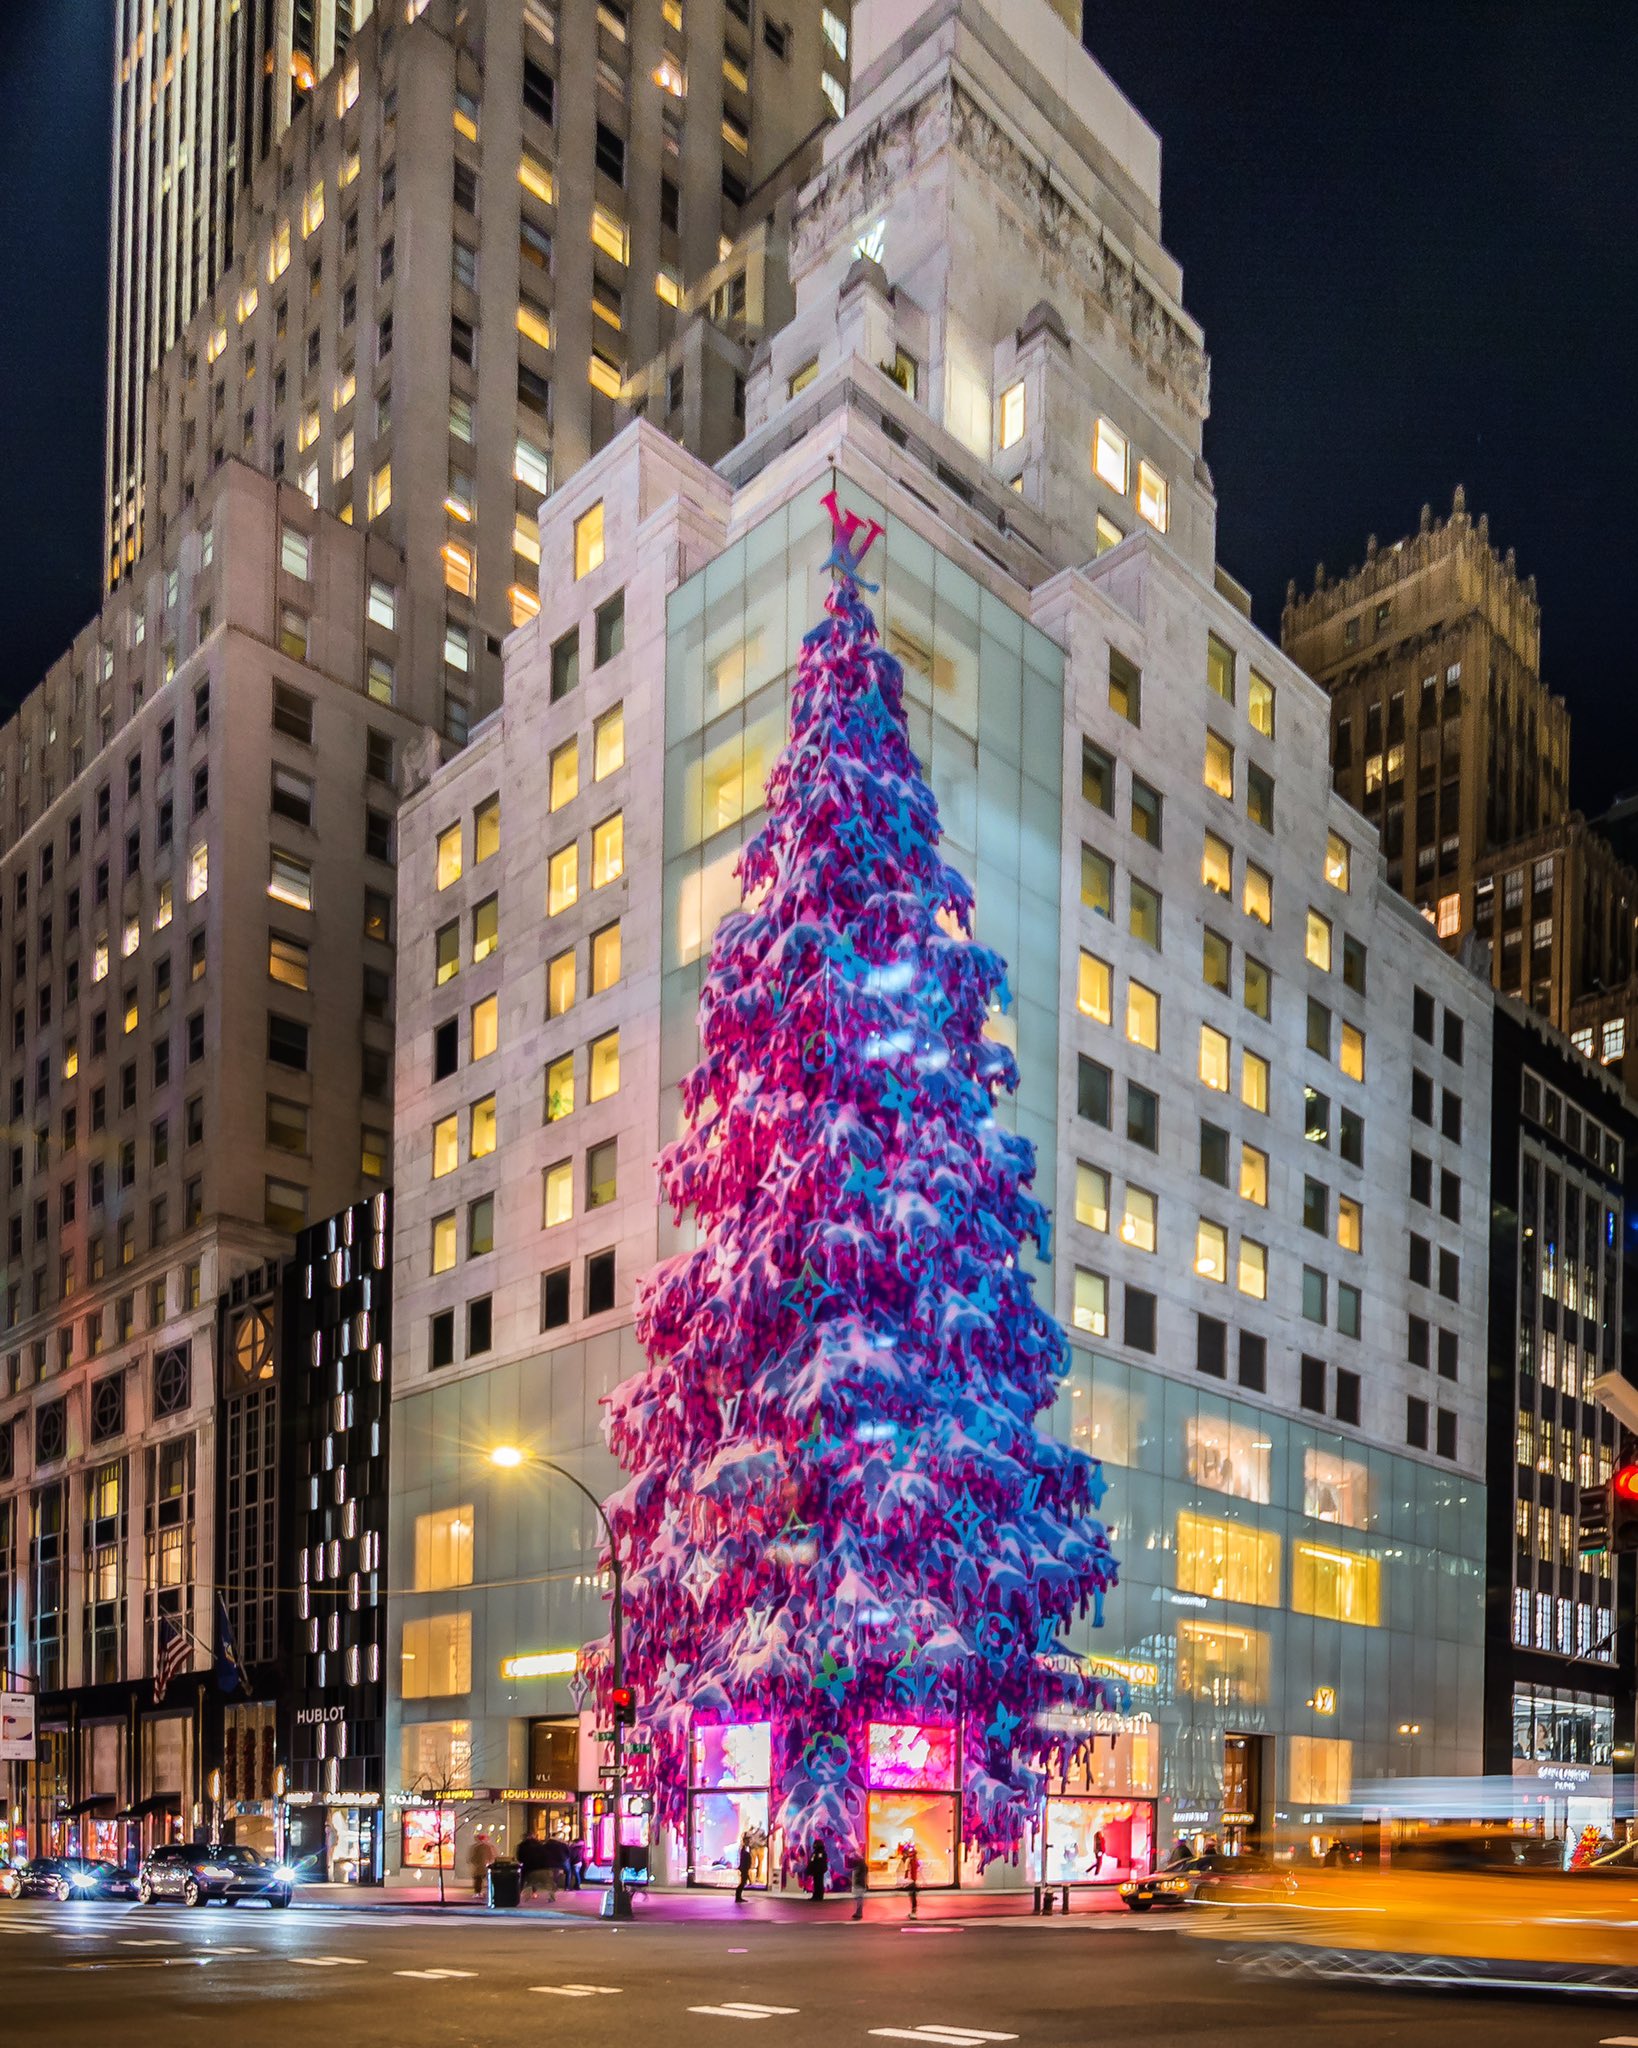 Louis Vuitton xmas tree💜🎄, By New York City 4 All